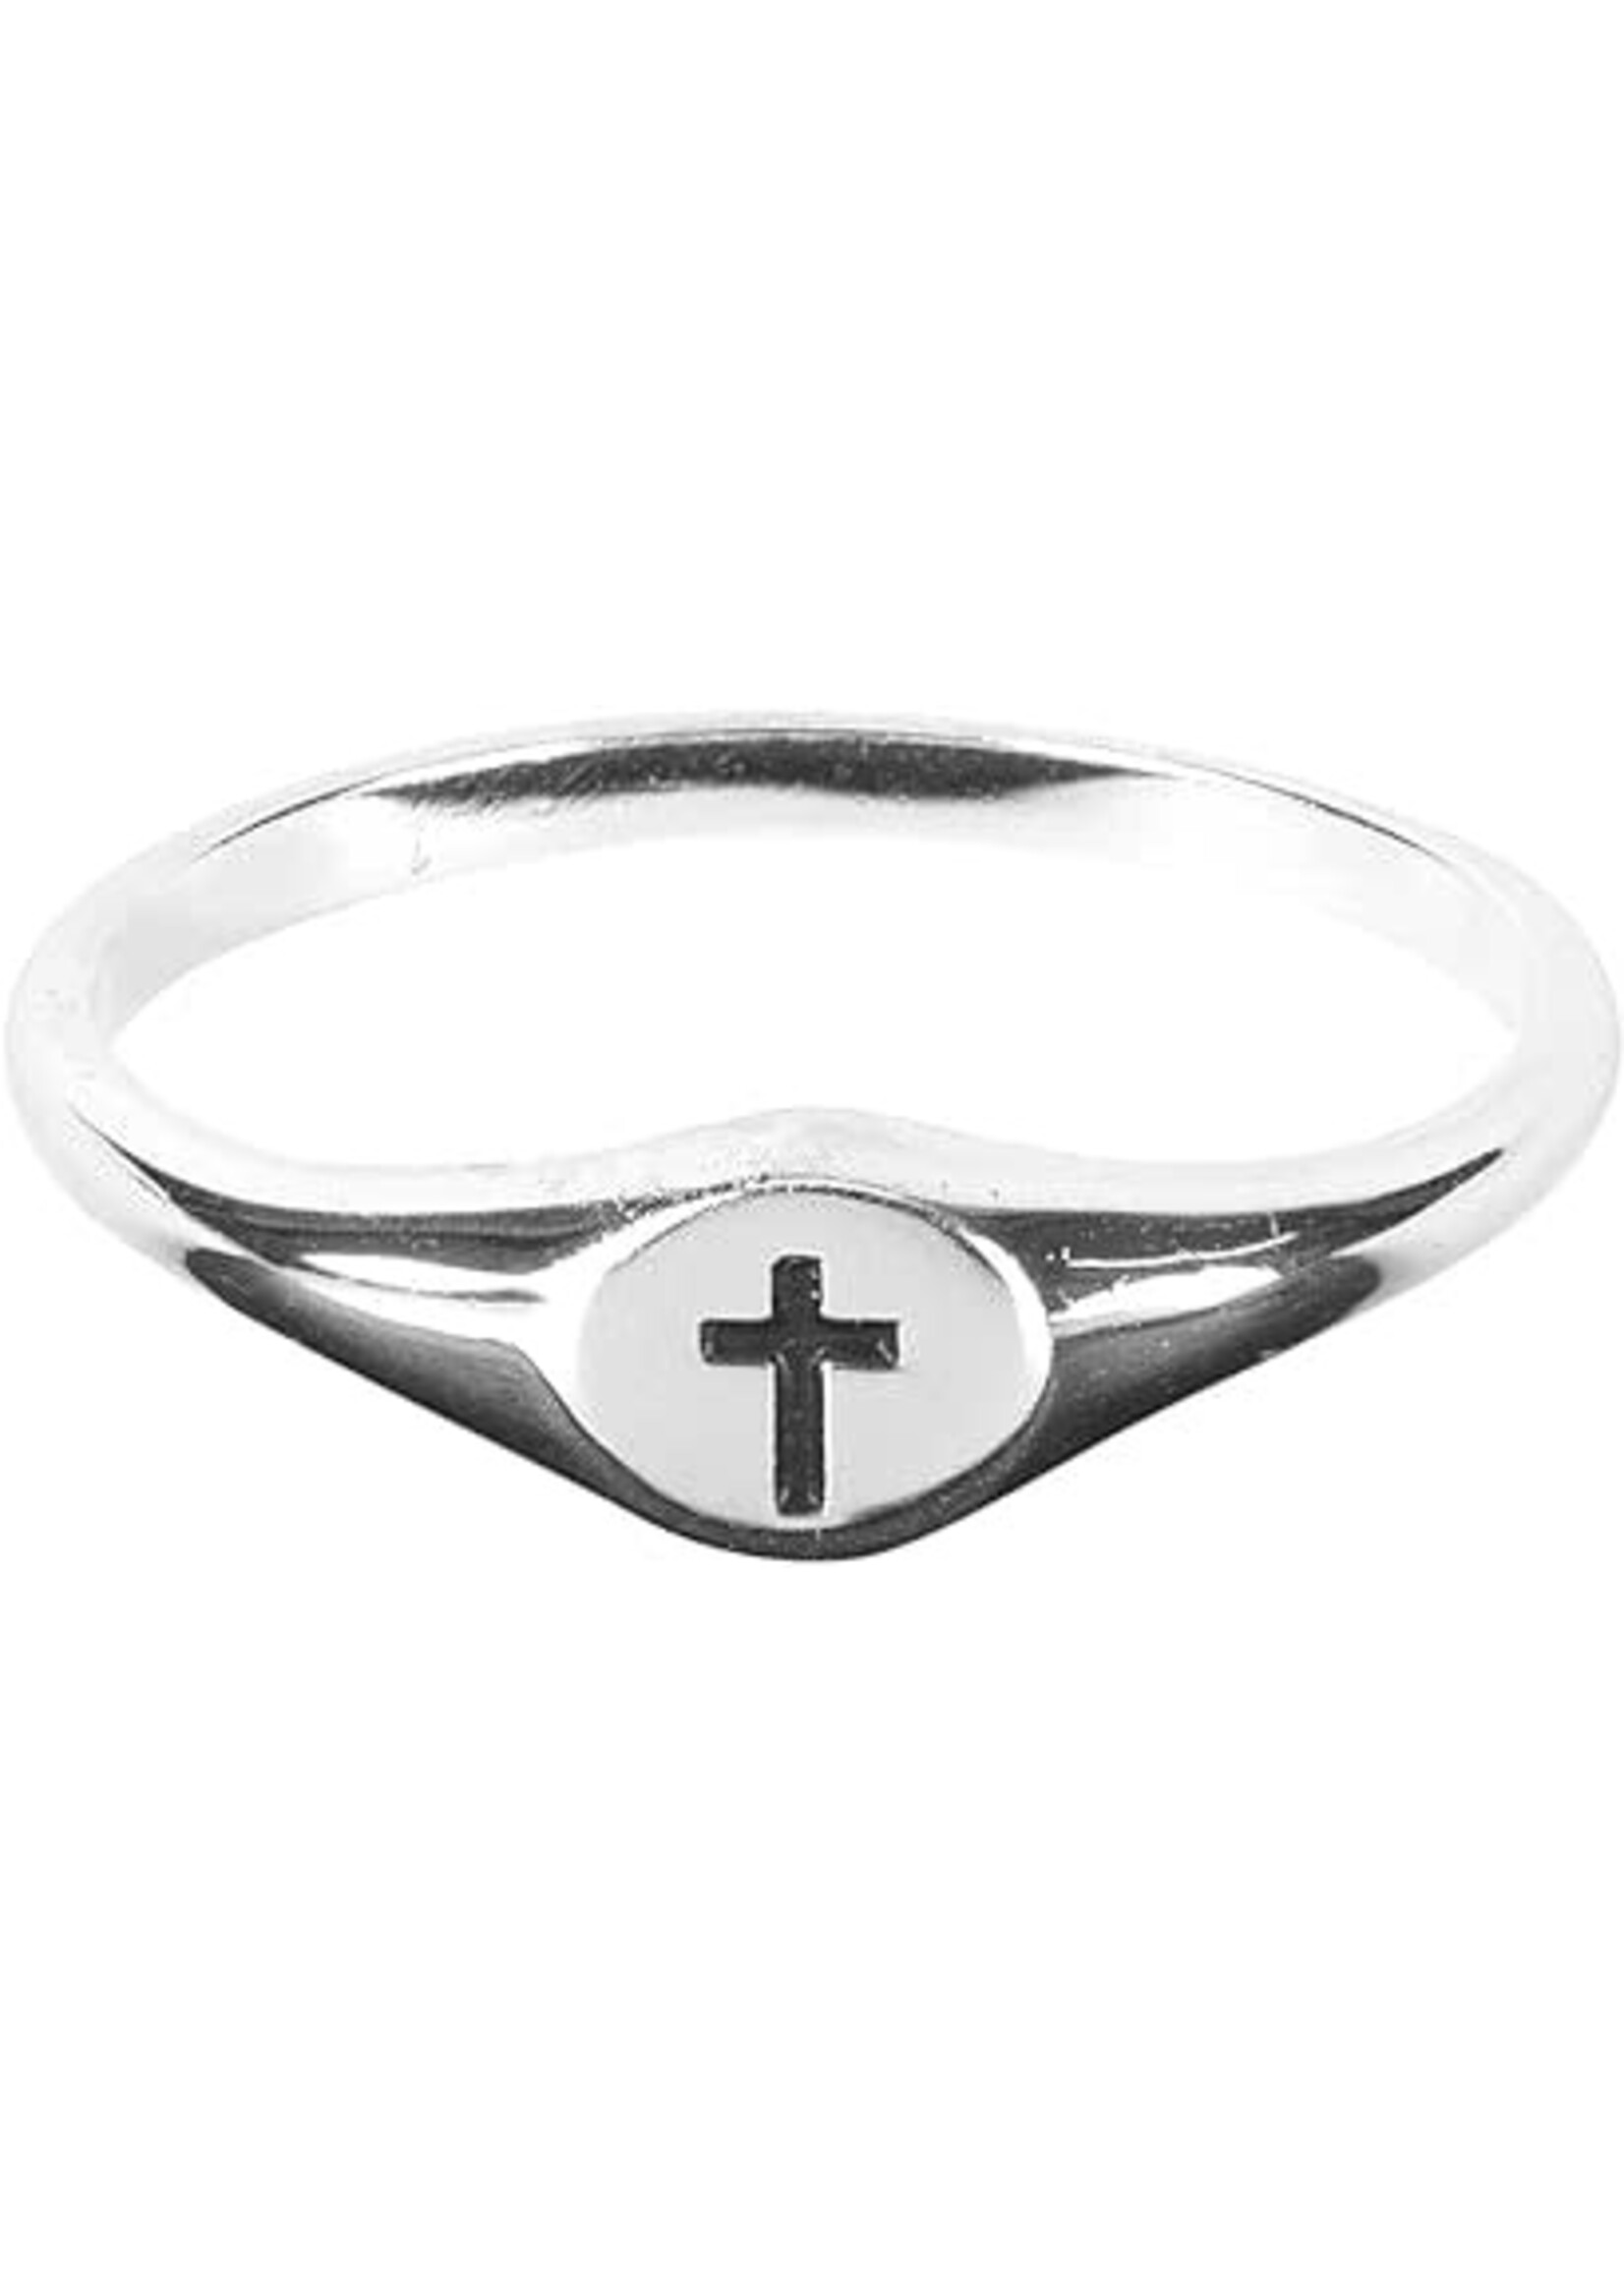 Ring Engraved Cross Size 9 Silver